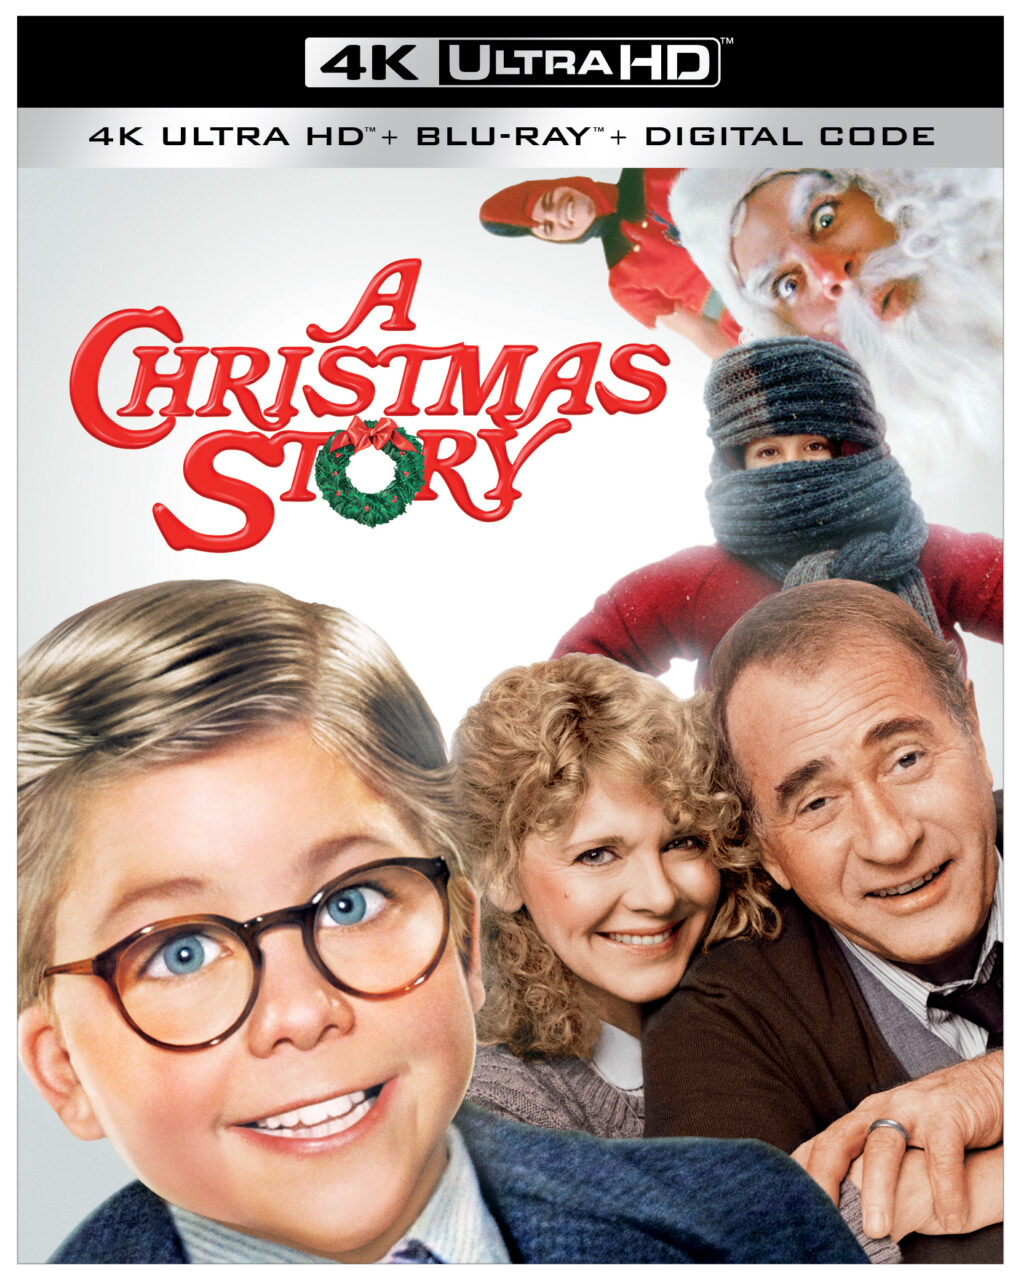 A Christmas Story 4K Ultra HD Combo Pack cover (Warner Bros. Home Entertainment)